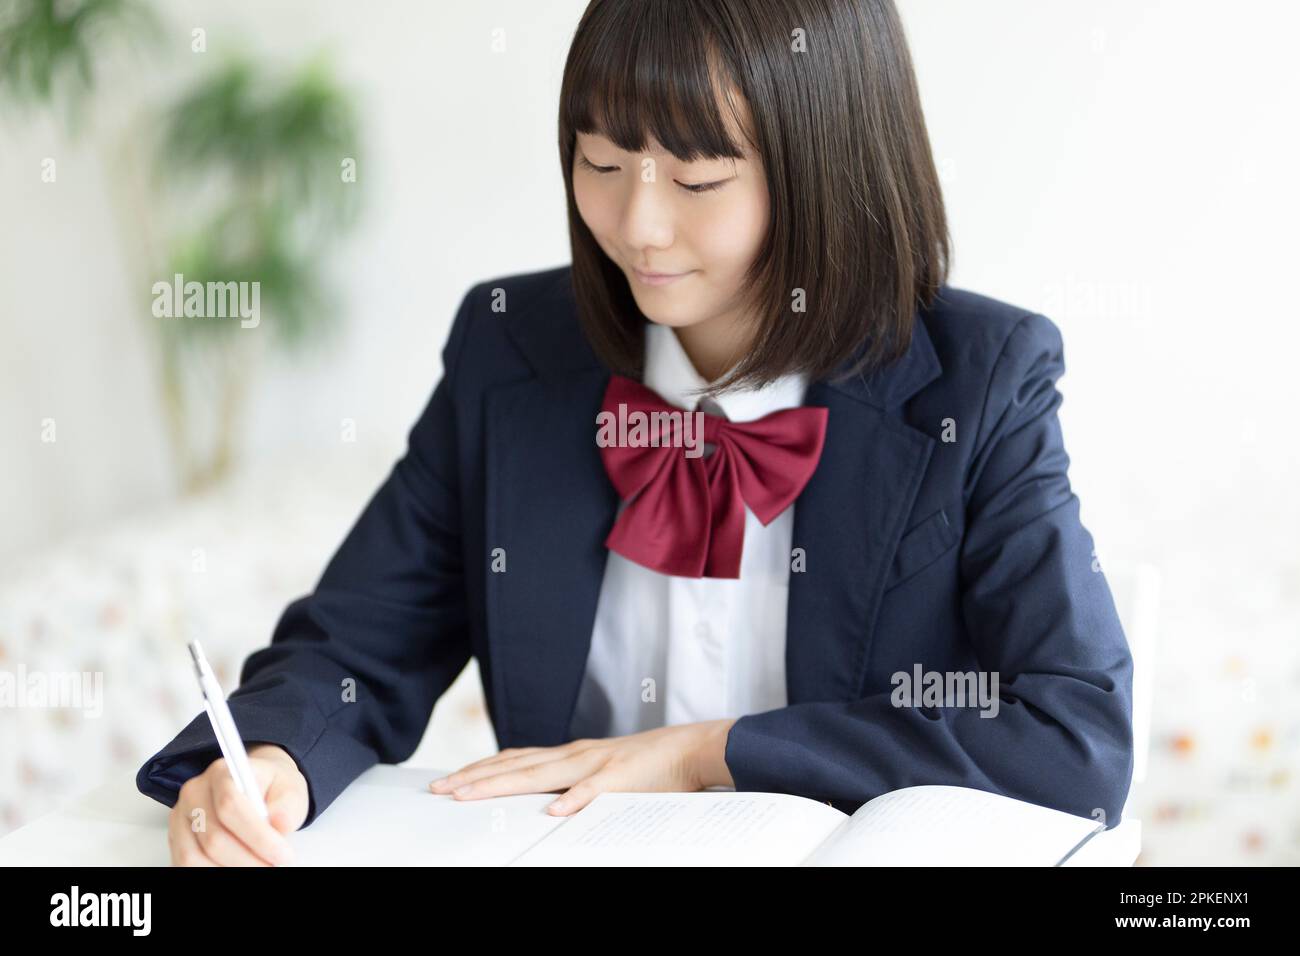 High school student studying at home Stock Photo